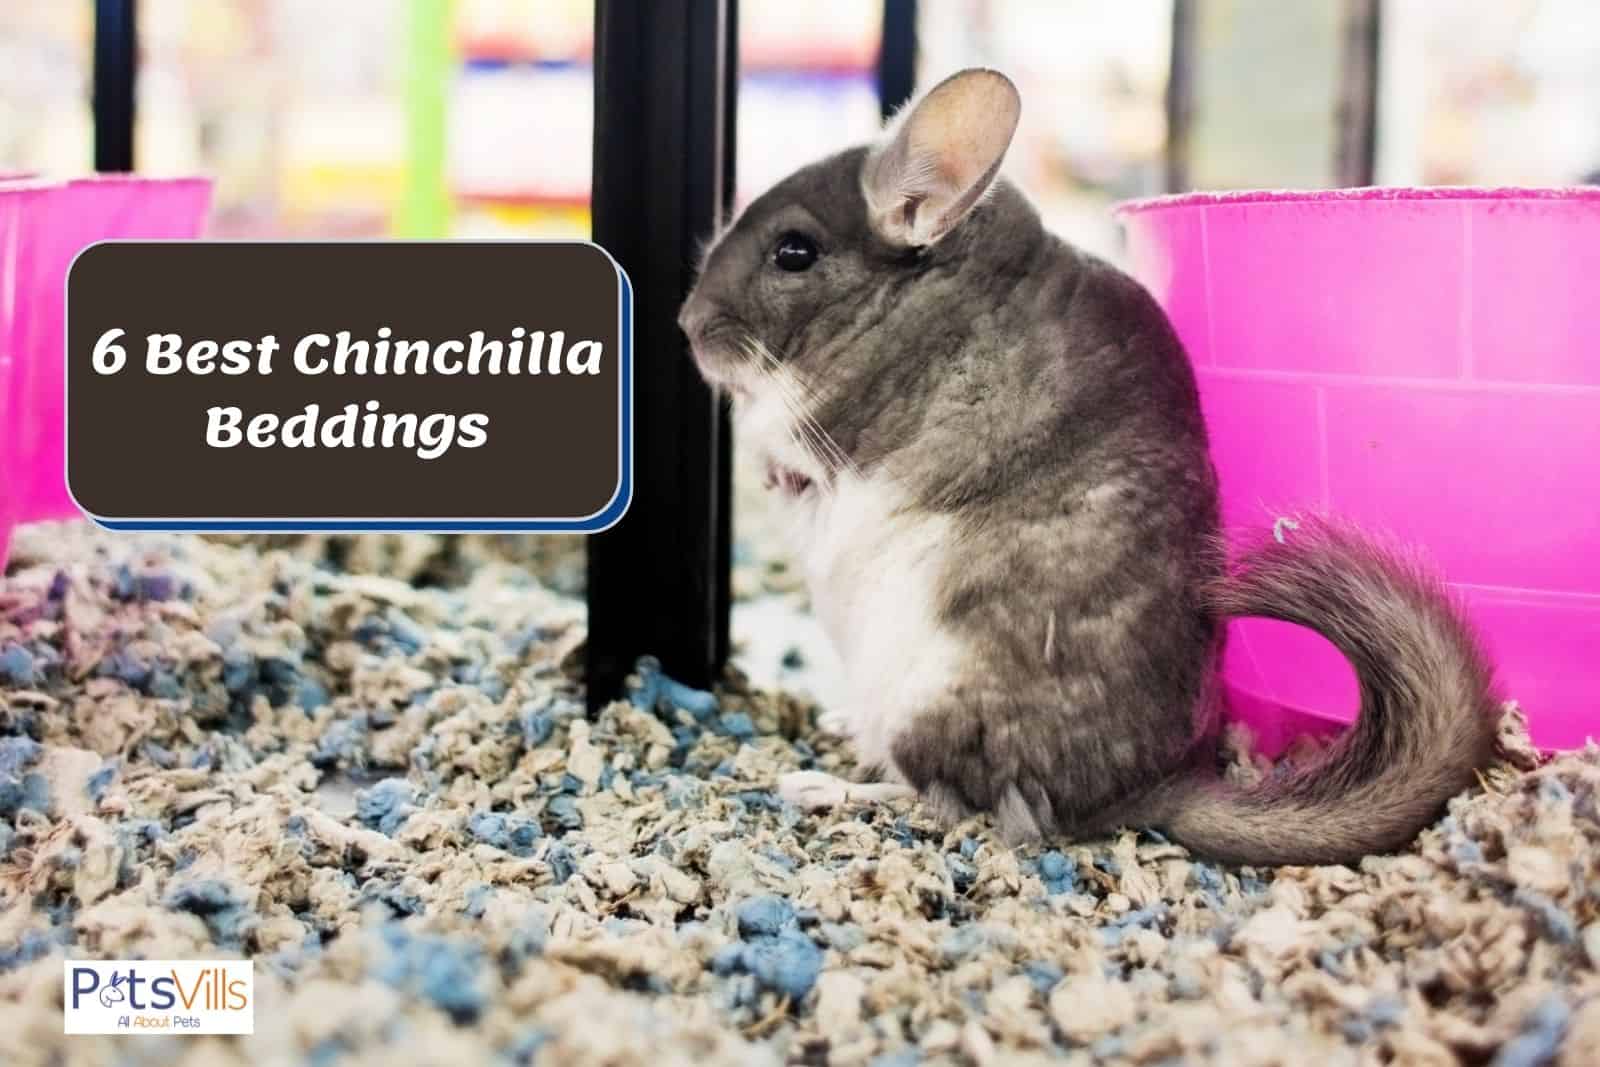 chinchilla in a cage with best beddings